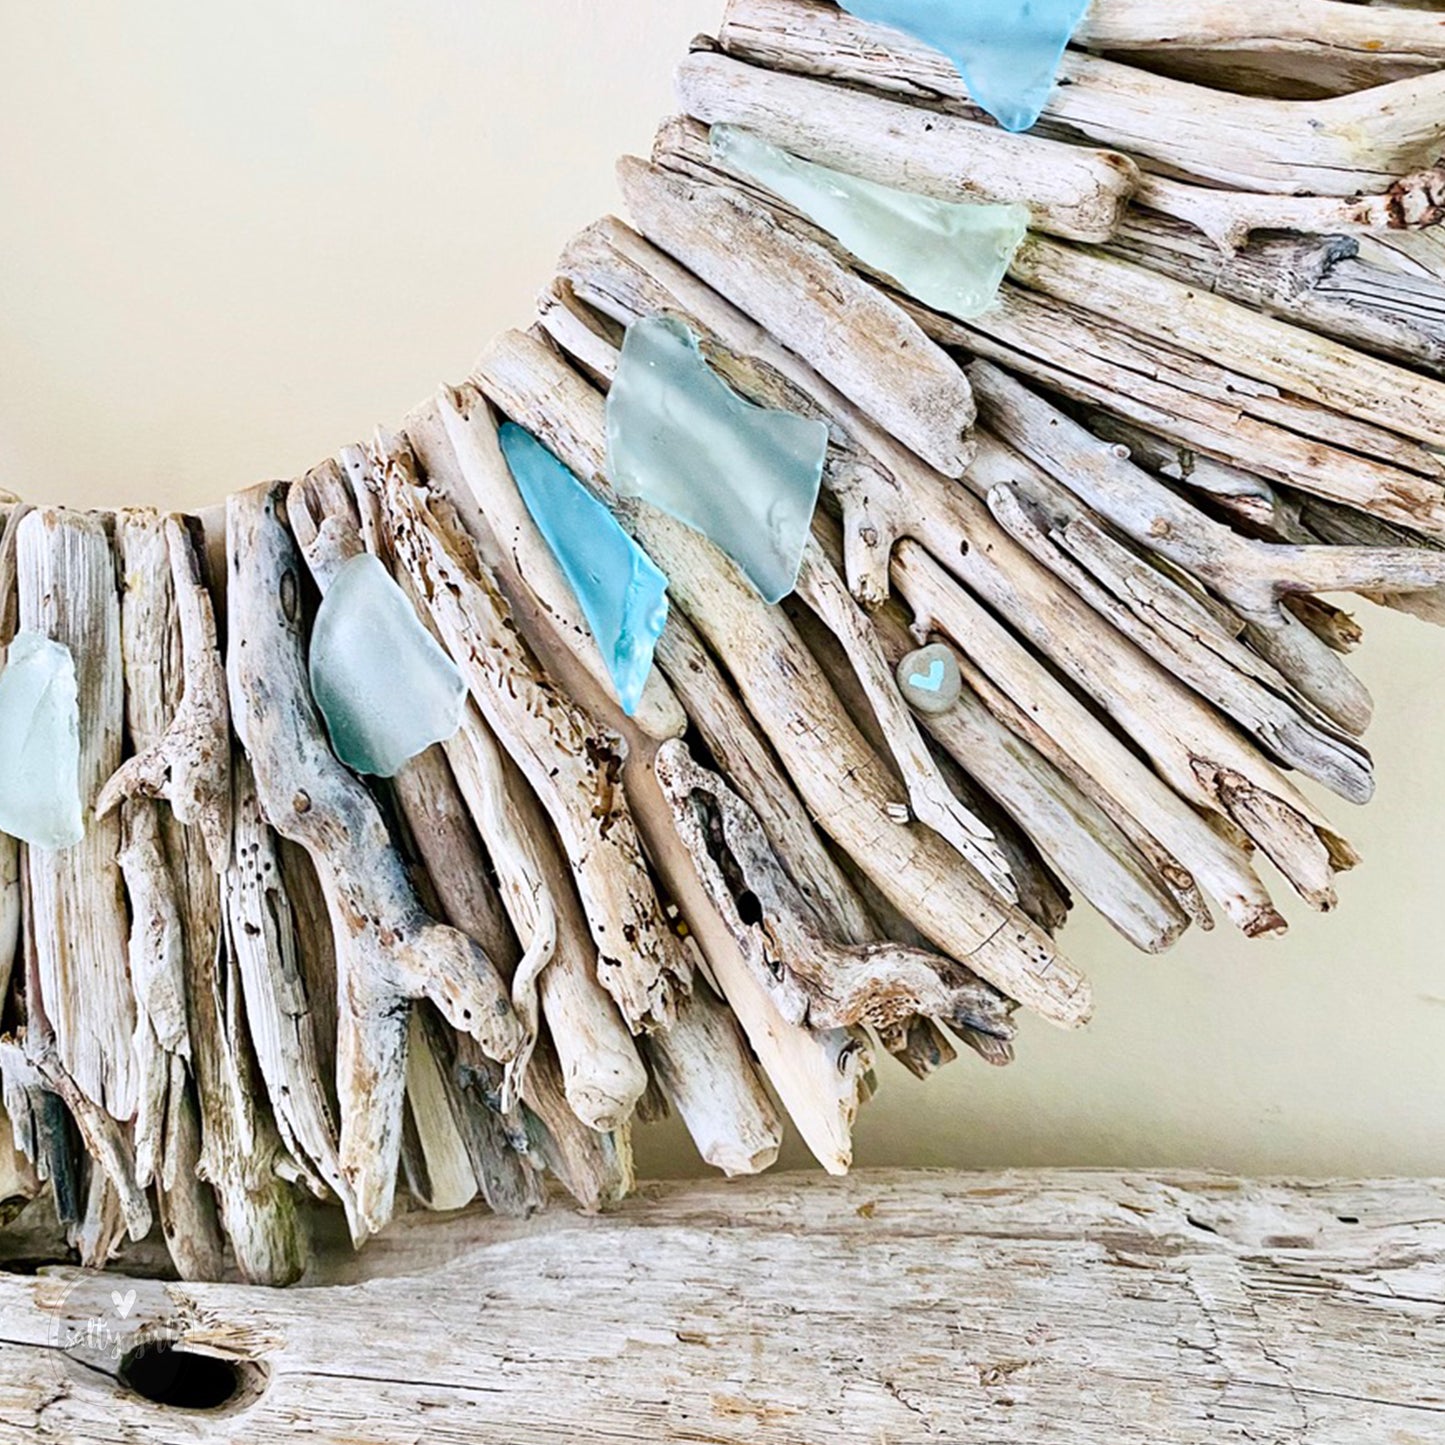 Maine Sun Bleached Driftwood Wreath with Subtle Blue & Green Sea Glass Accents - Sizes: 20" or 24"